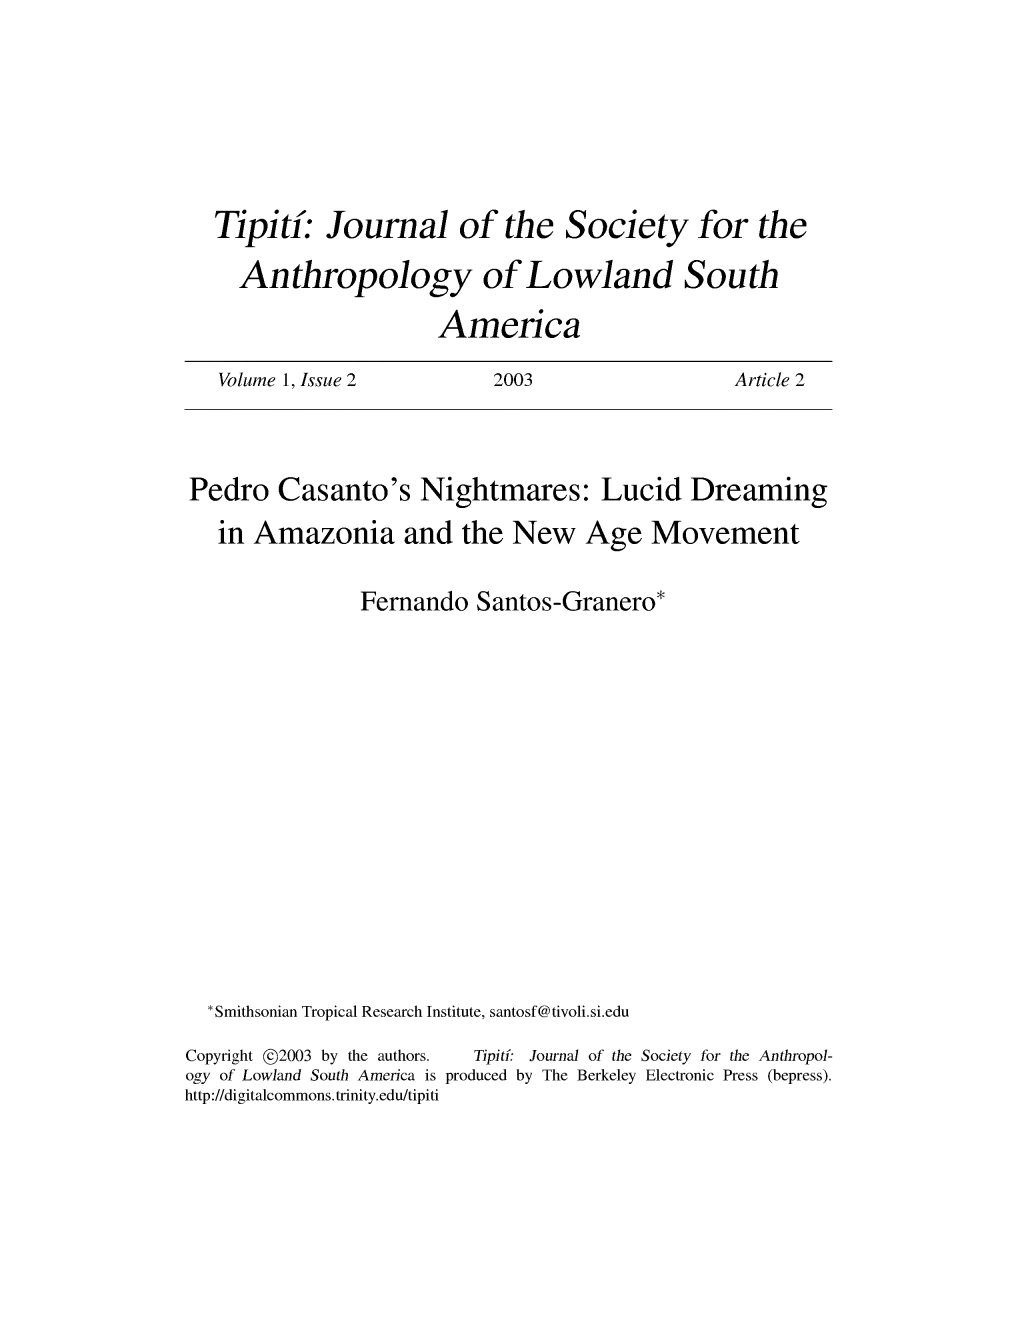 Tipiti: Journal of the Society for the Anthropology of Lowland South America